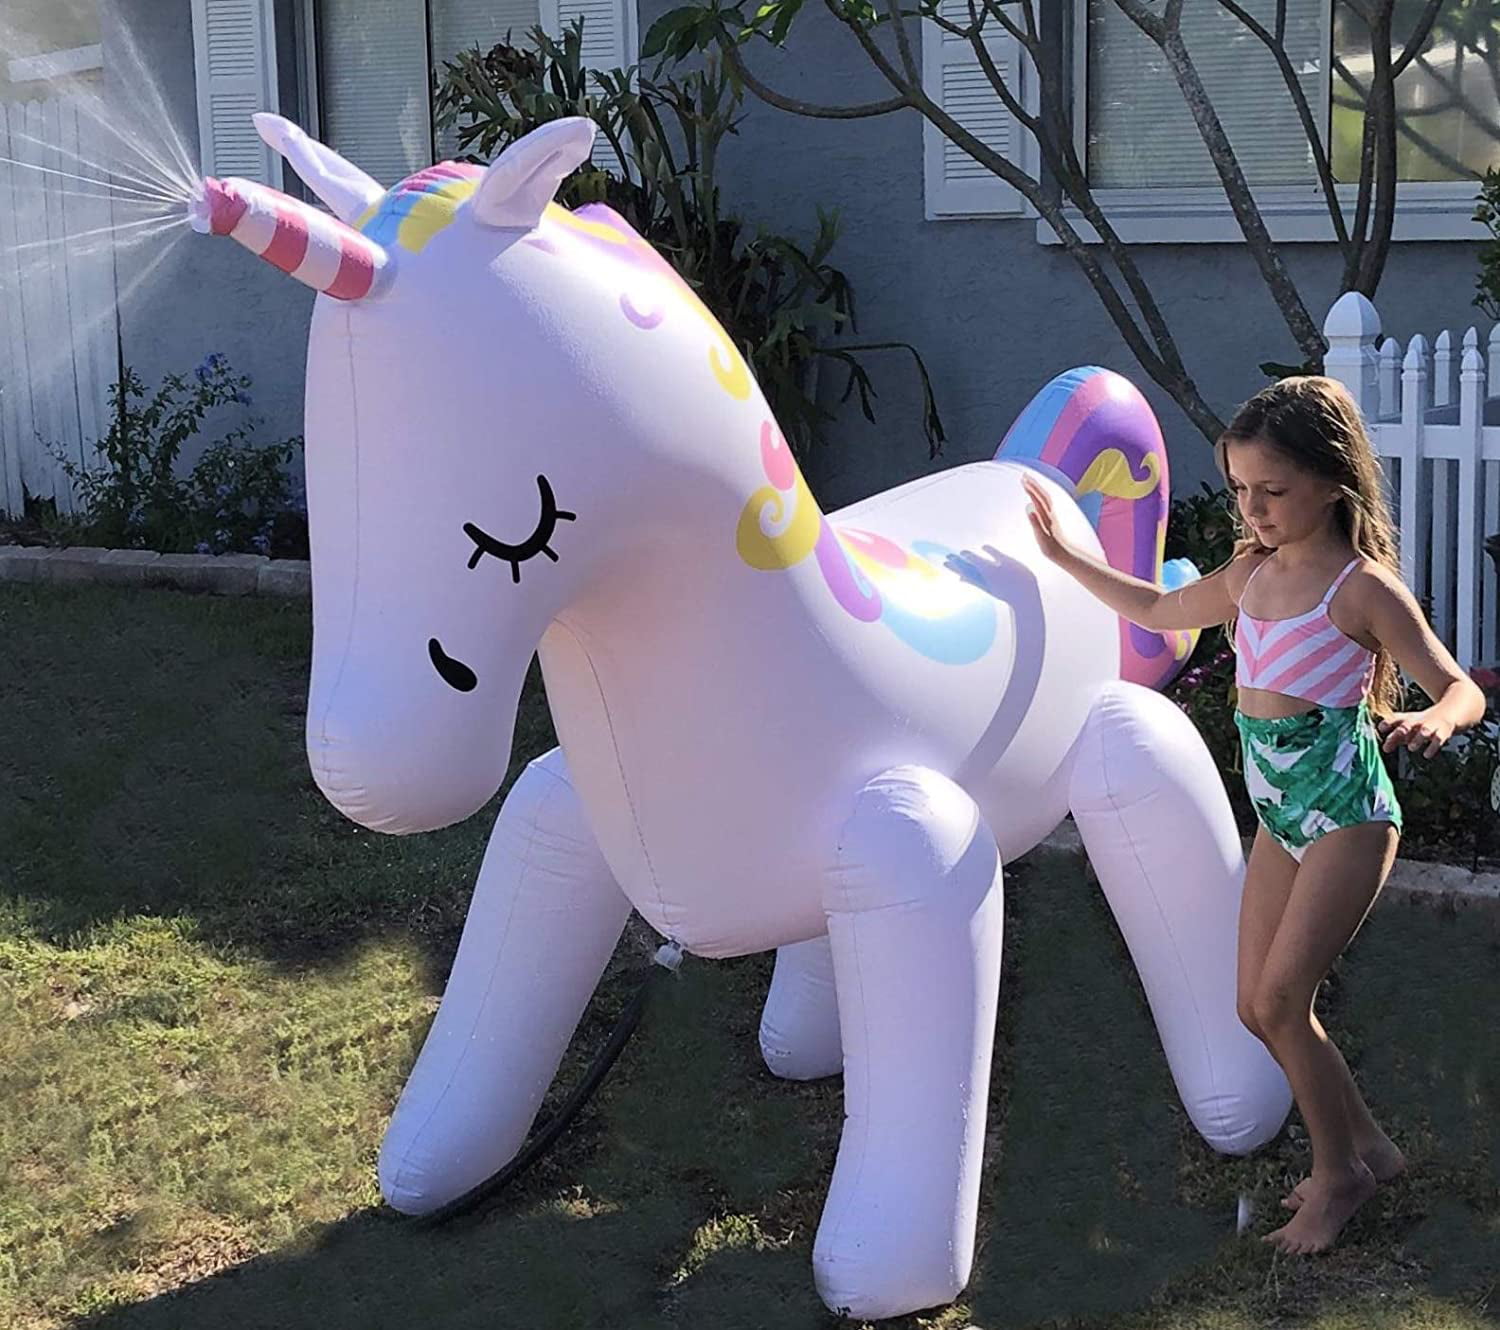 Great Outdoor Birthday Party Game for Backyard Giant Inflatable Unicorn Sprinkler for Kids Adults Durable PVC Unicorn Gifts for Girls and Boys THE ORIGINAL UNICORN SPRINKLER Toy 